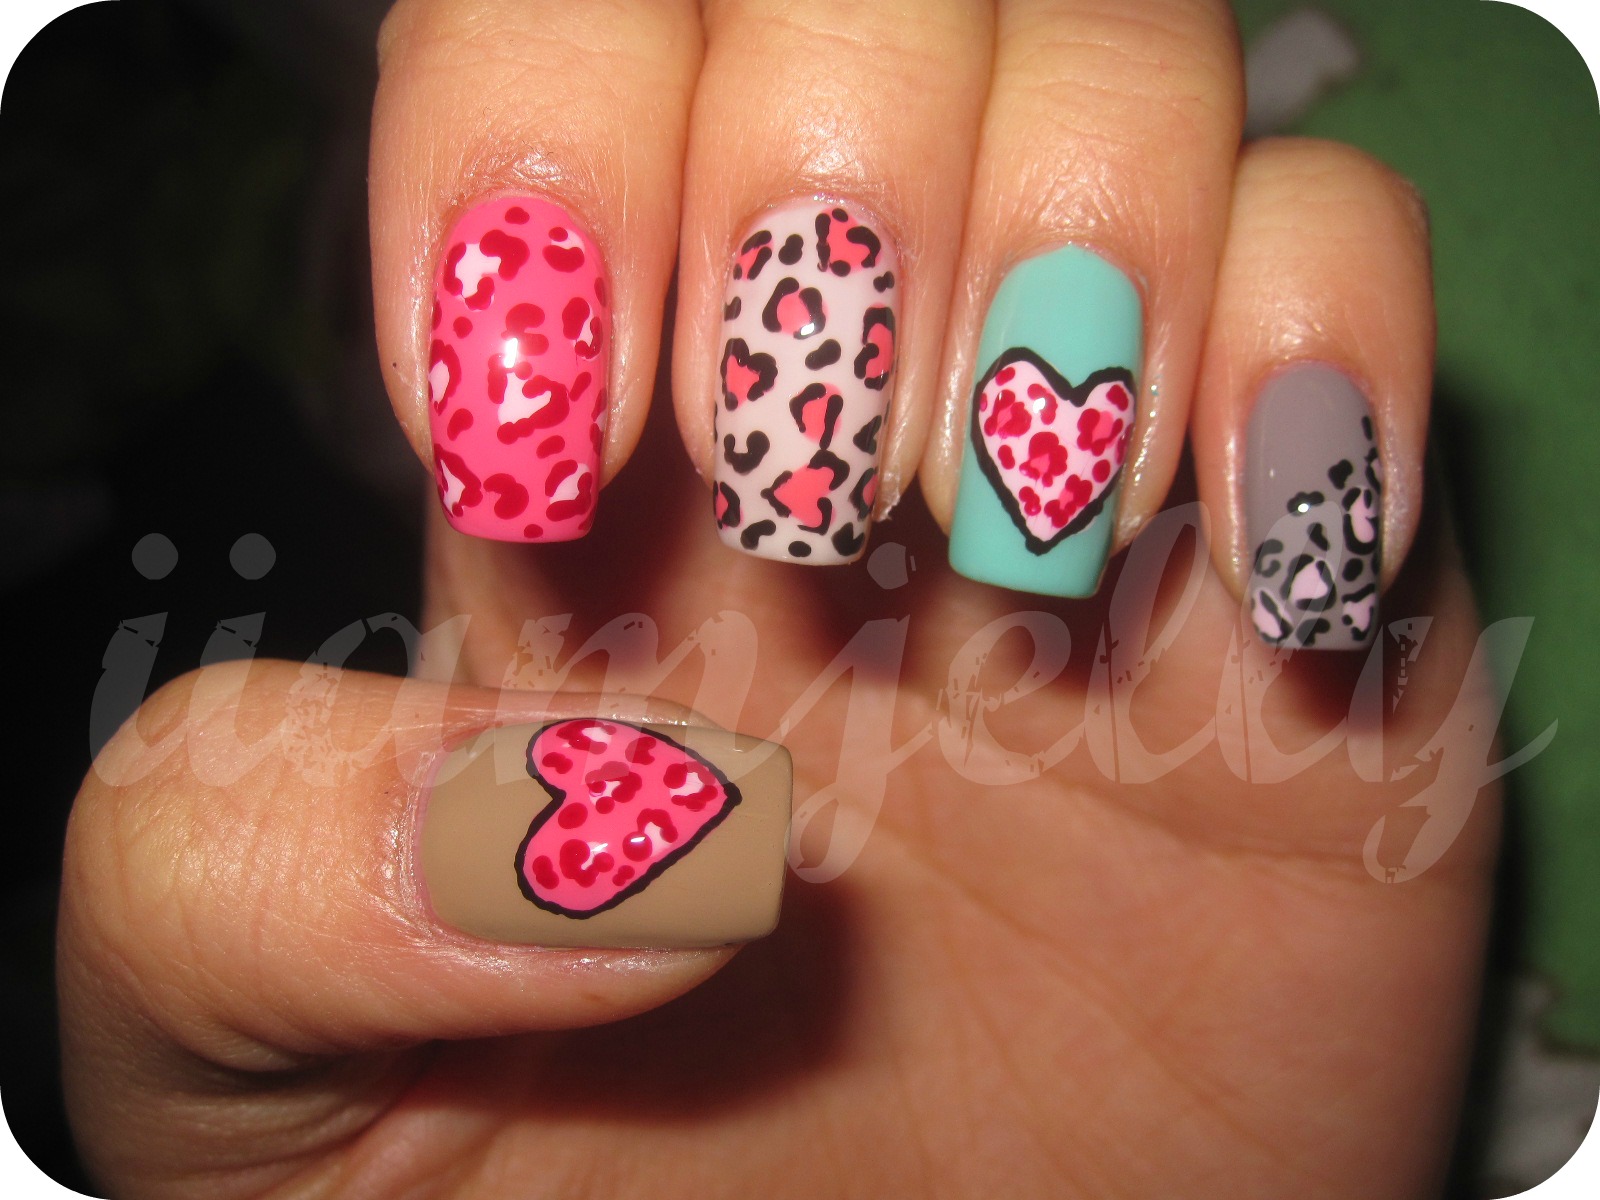 Jelly's Nails Valentine's Day Nails!